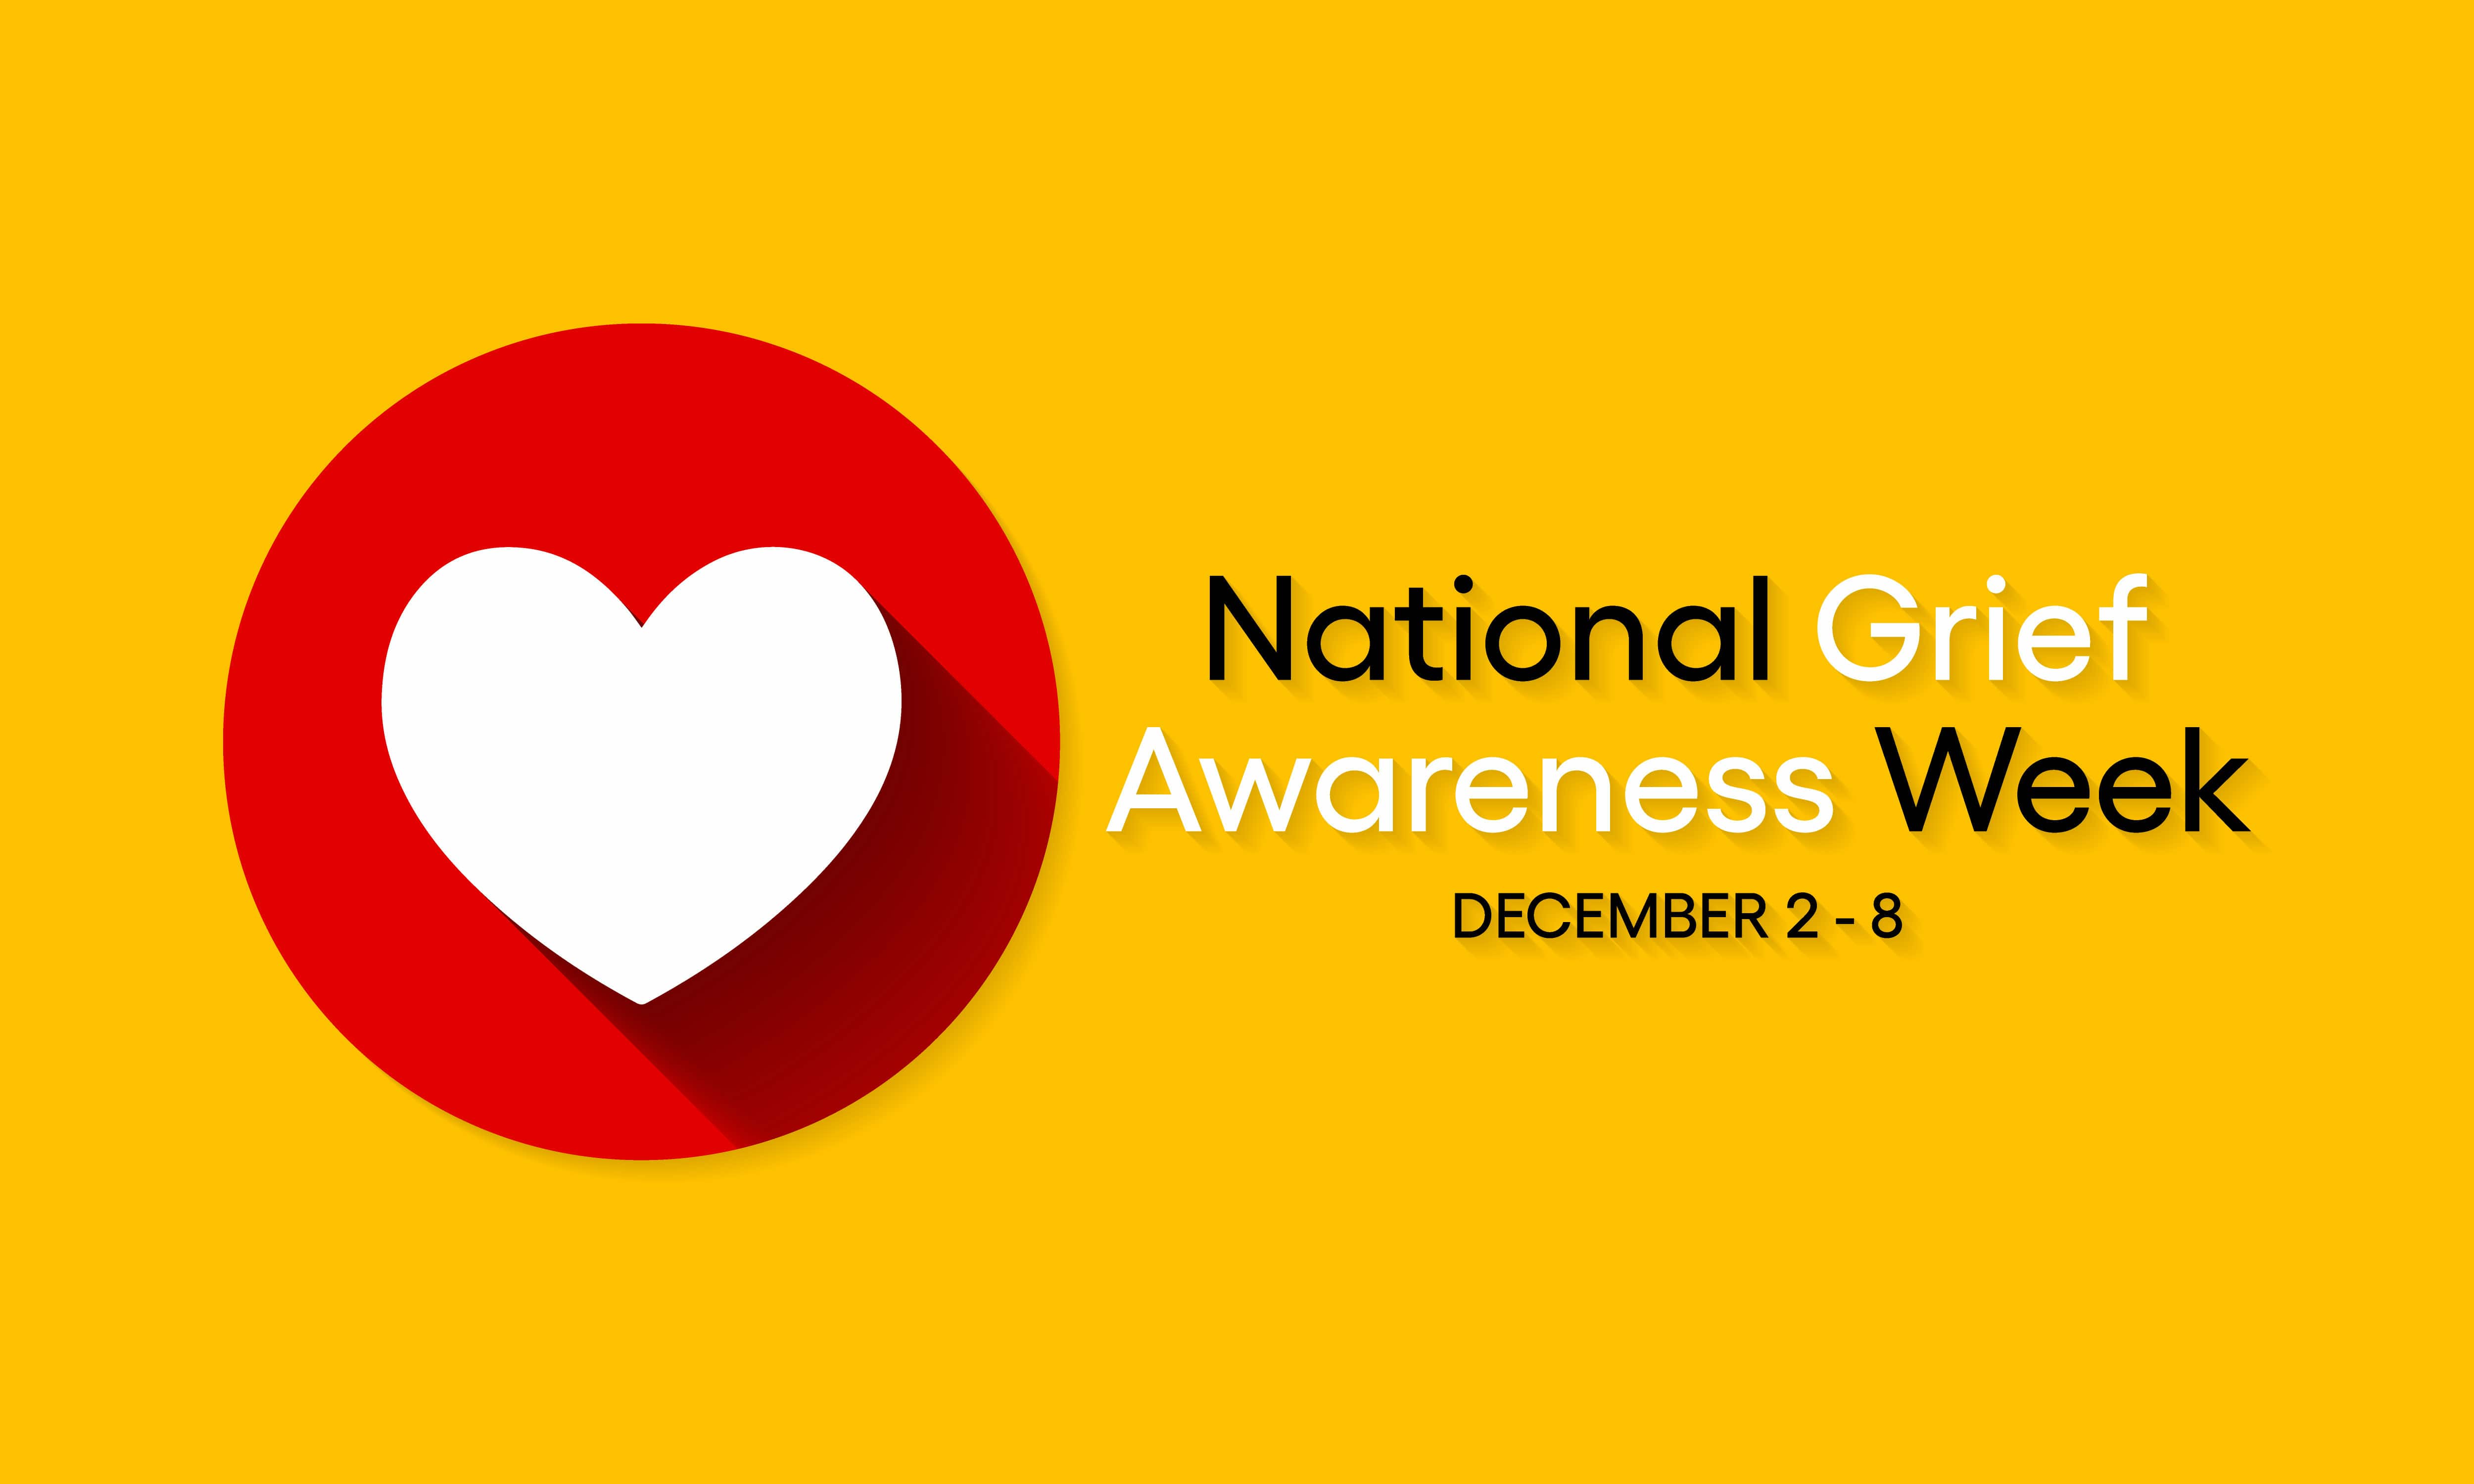 To the left there is a white heart in a red circle. To the write the text reads National Grief Awareness Week December 2 - 8